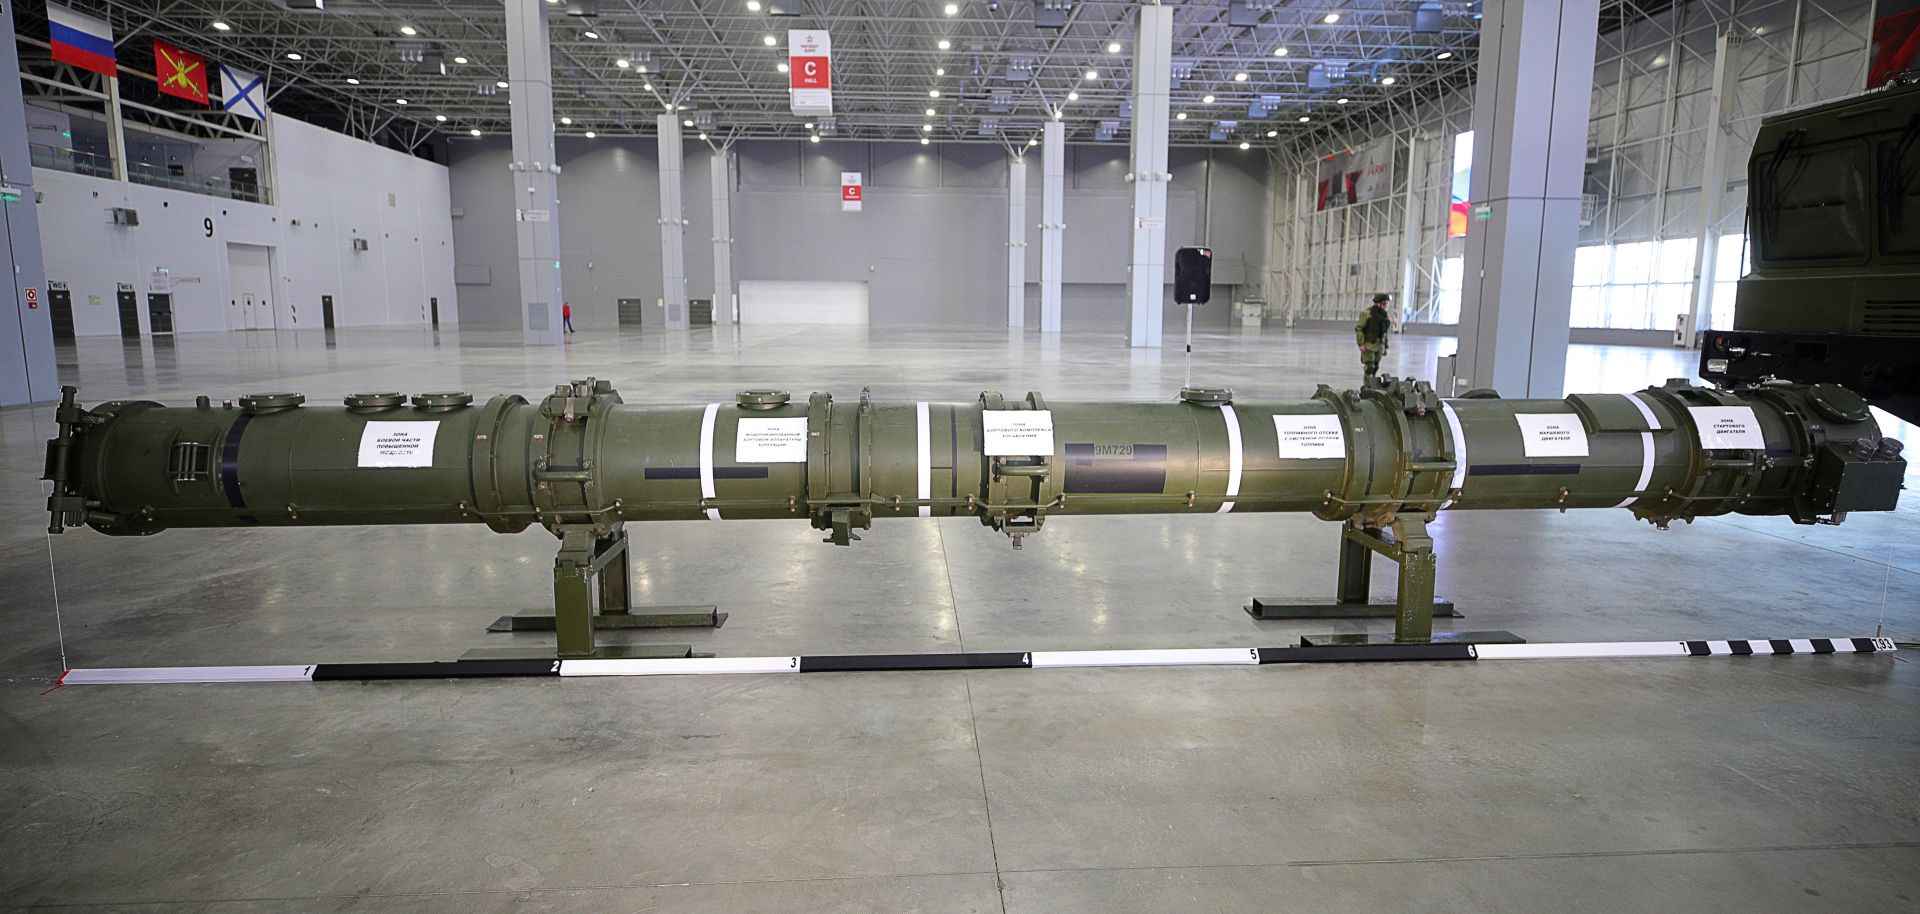 This photo shows a Russian 9M729 missile